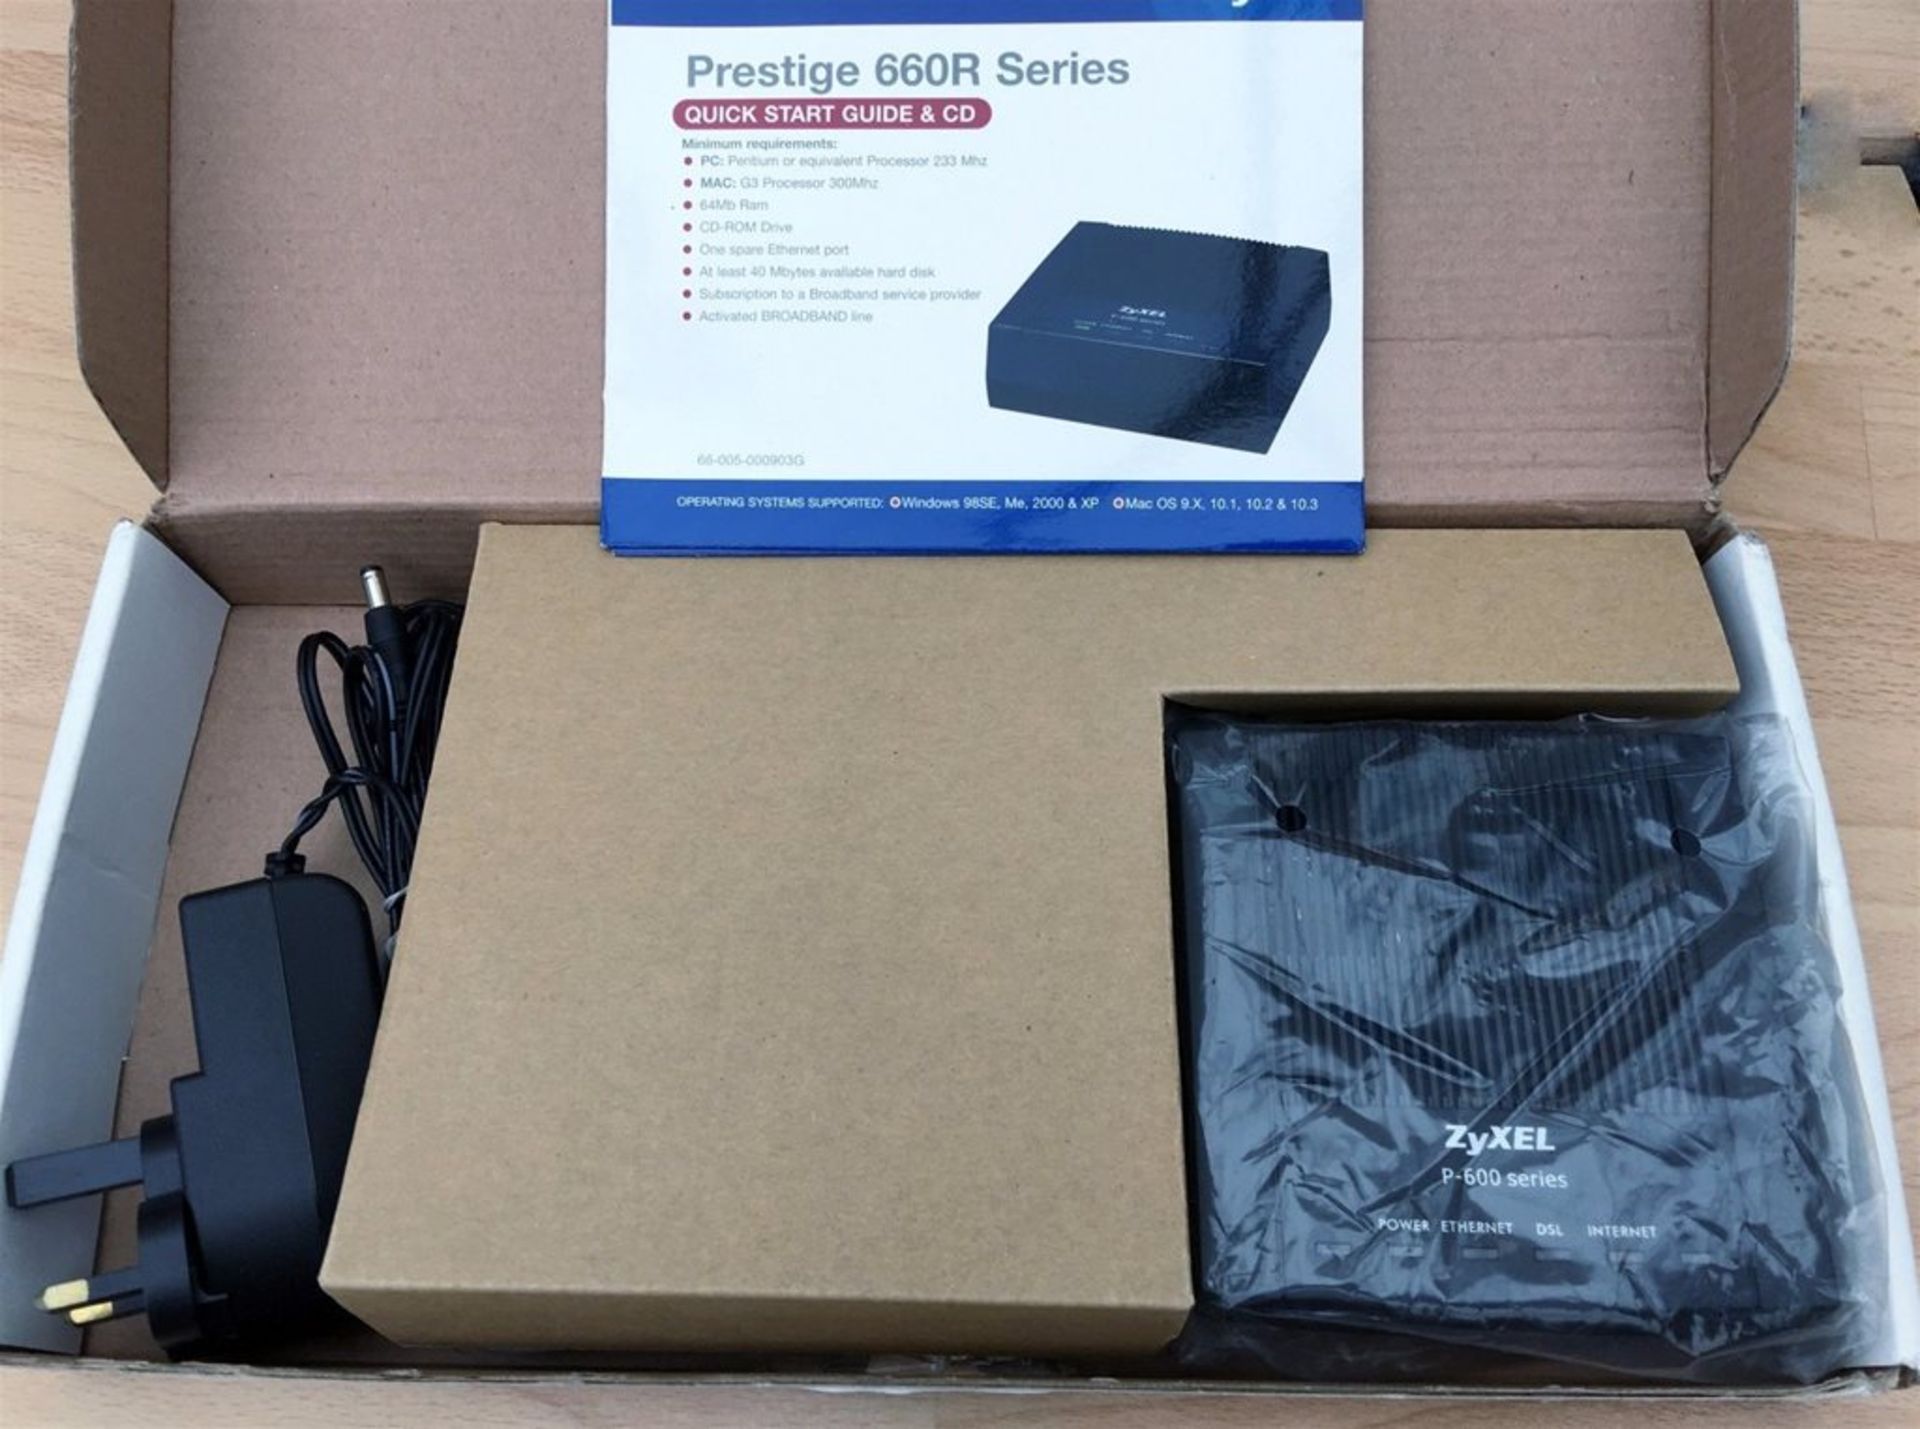 ZyXEL Prestige 660R-D1 Postable ADSL2+ Router with 1x10/100 LAN port